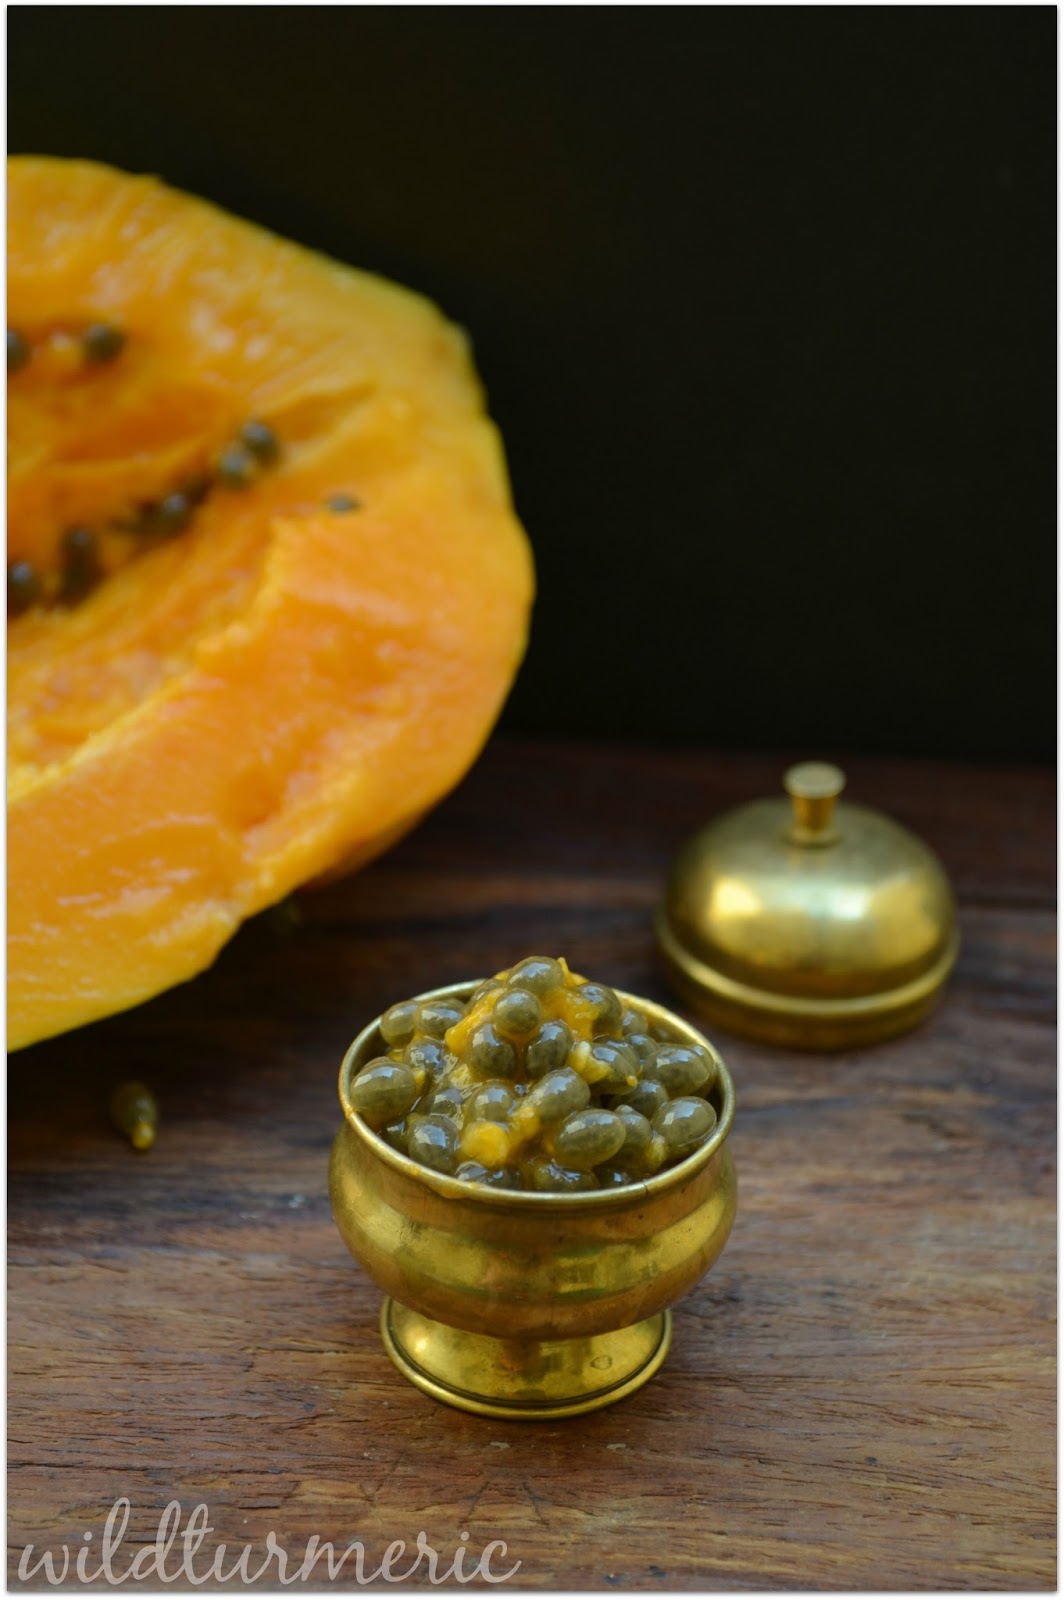 5 Top Medicinal Uses Benefits Of Eating Papaya Seeds For Parasites Kidney Liver Wildturmeric,Cooking Ribs In Oven Then Grill